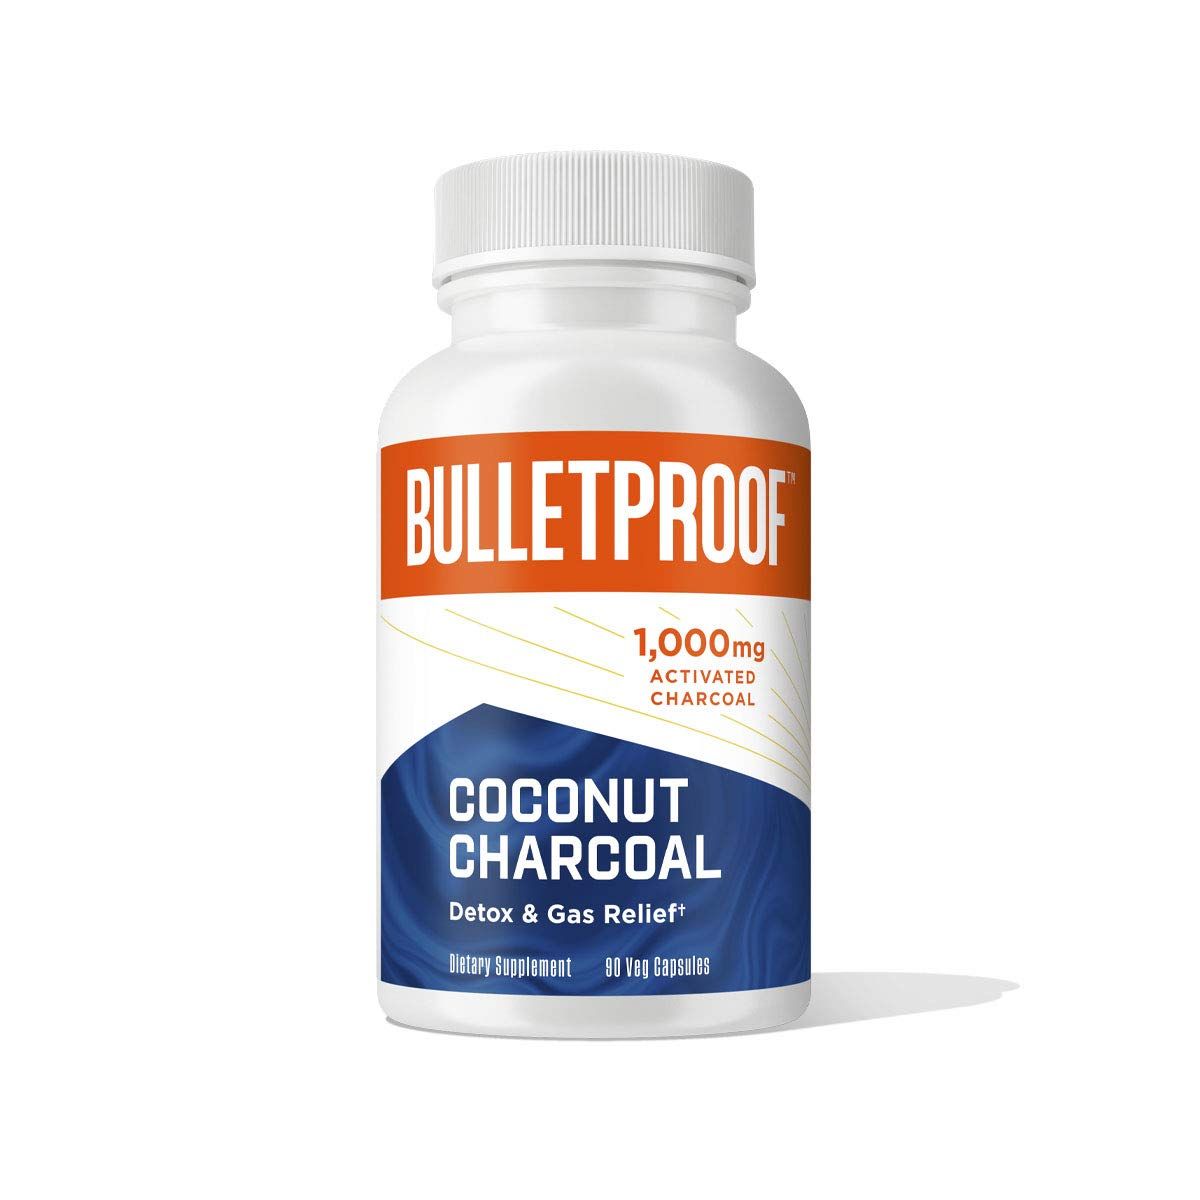 Bulletproof Upgraded Coconut Charcoal Capsules Image